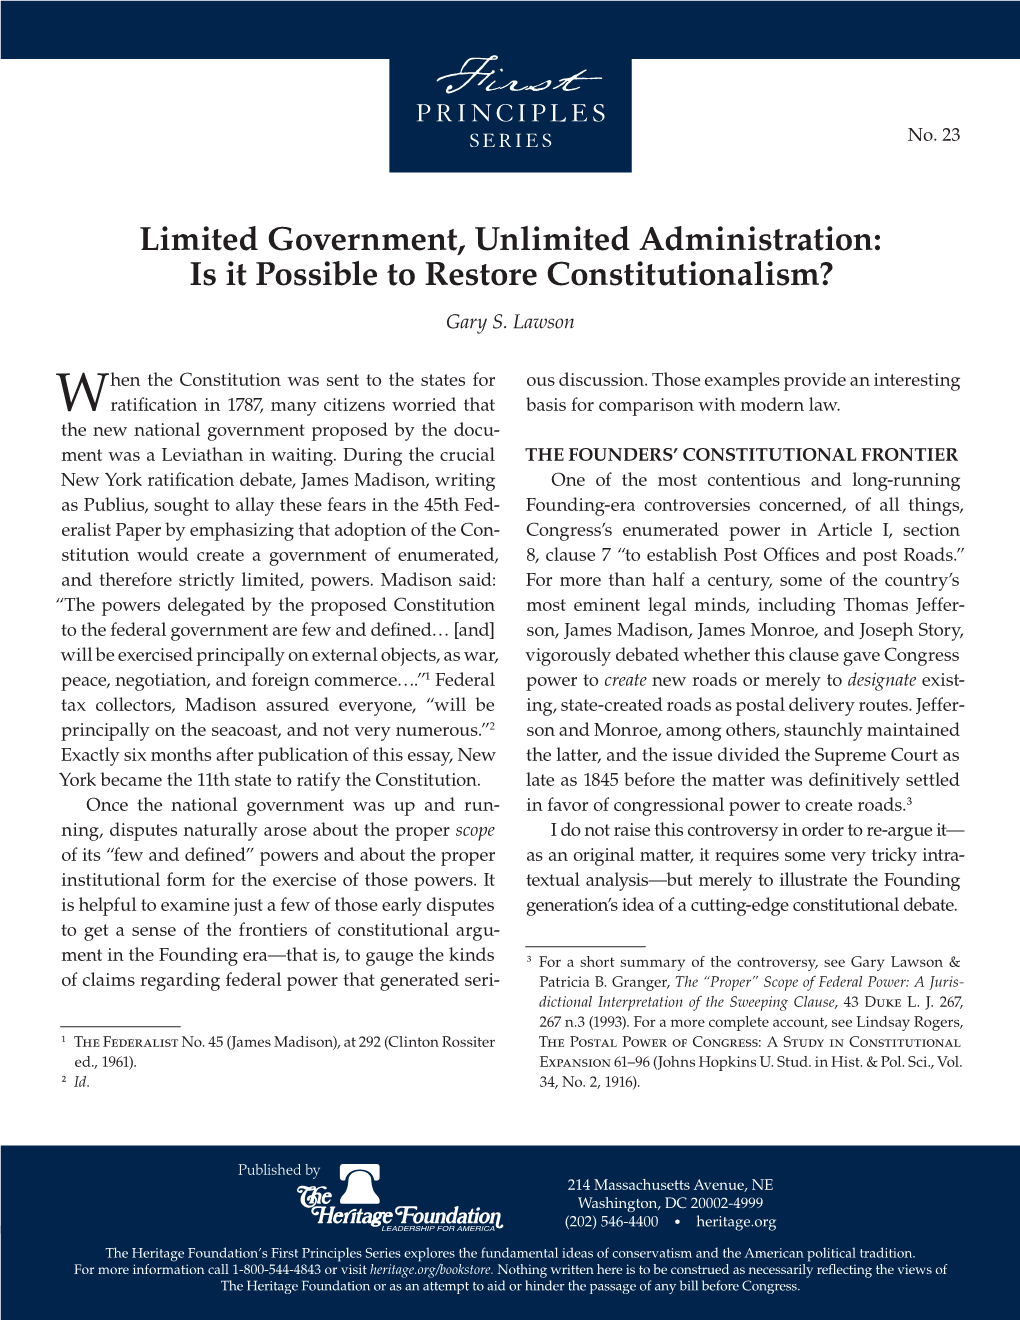 Limited Government, Unlimited Administration: Is It Possible to Restore Constitutionalism? Gary S